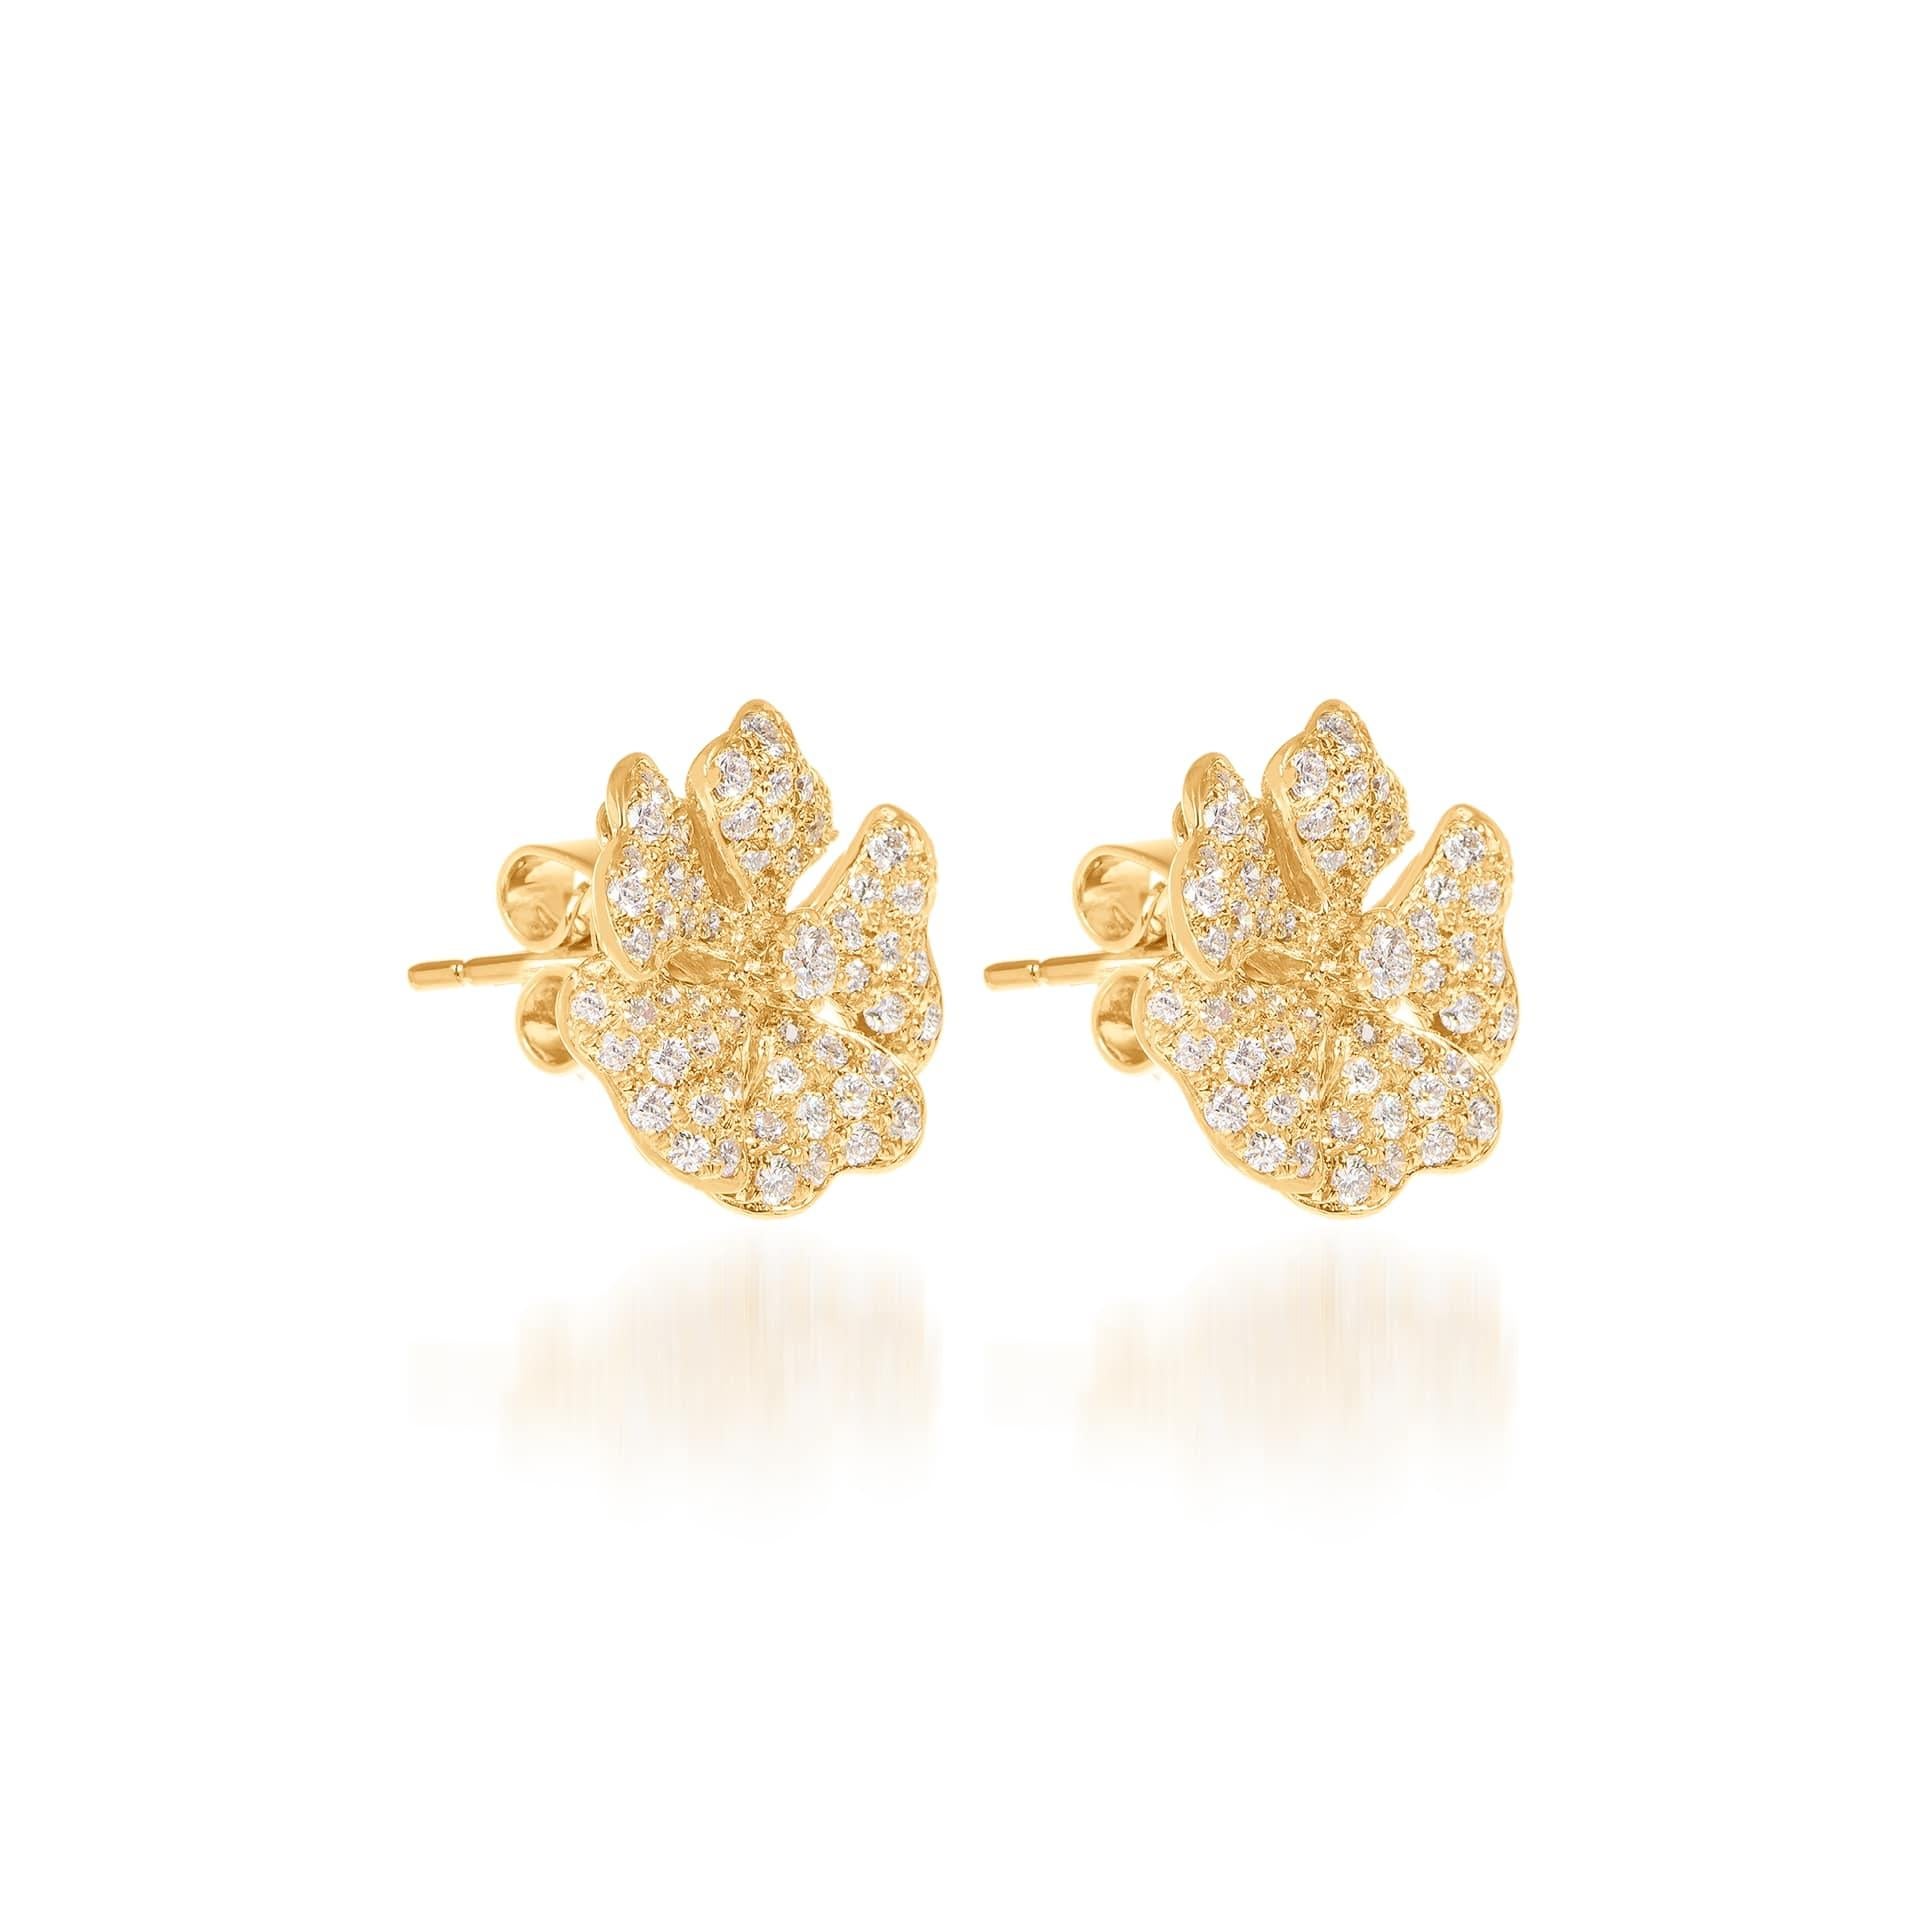 Bloom Gold and Pavé Diamond Small Stud Earrings in 18K Yellow Gold

Inspired by the exquisite petals of the alpine cinquefoil flower, the Bloom collection combines the richness of diamonds and precious metals with the light versatility of this